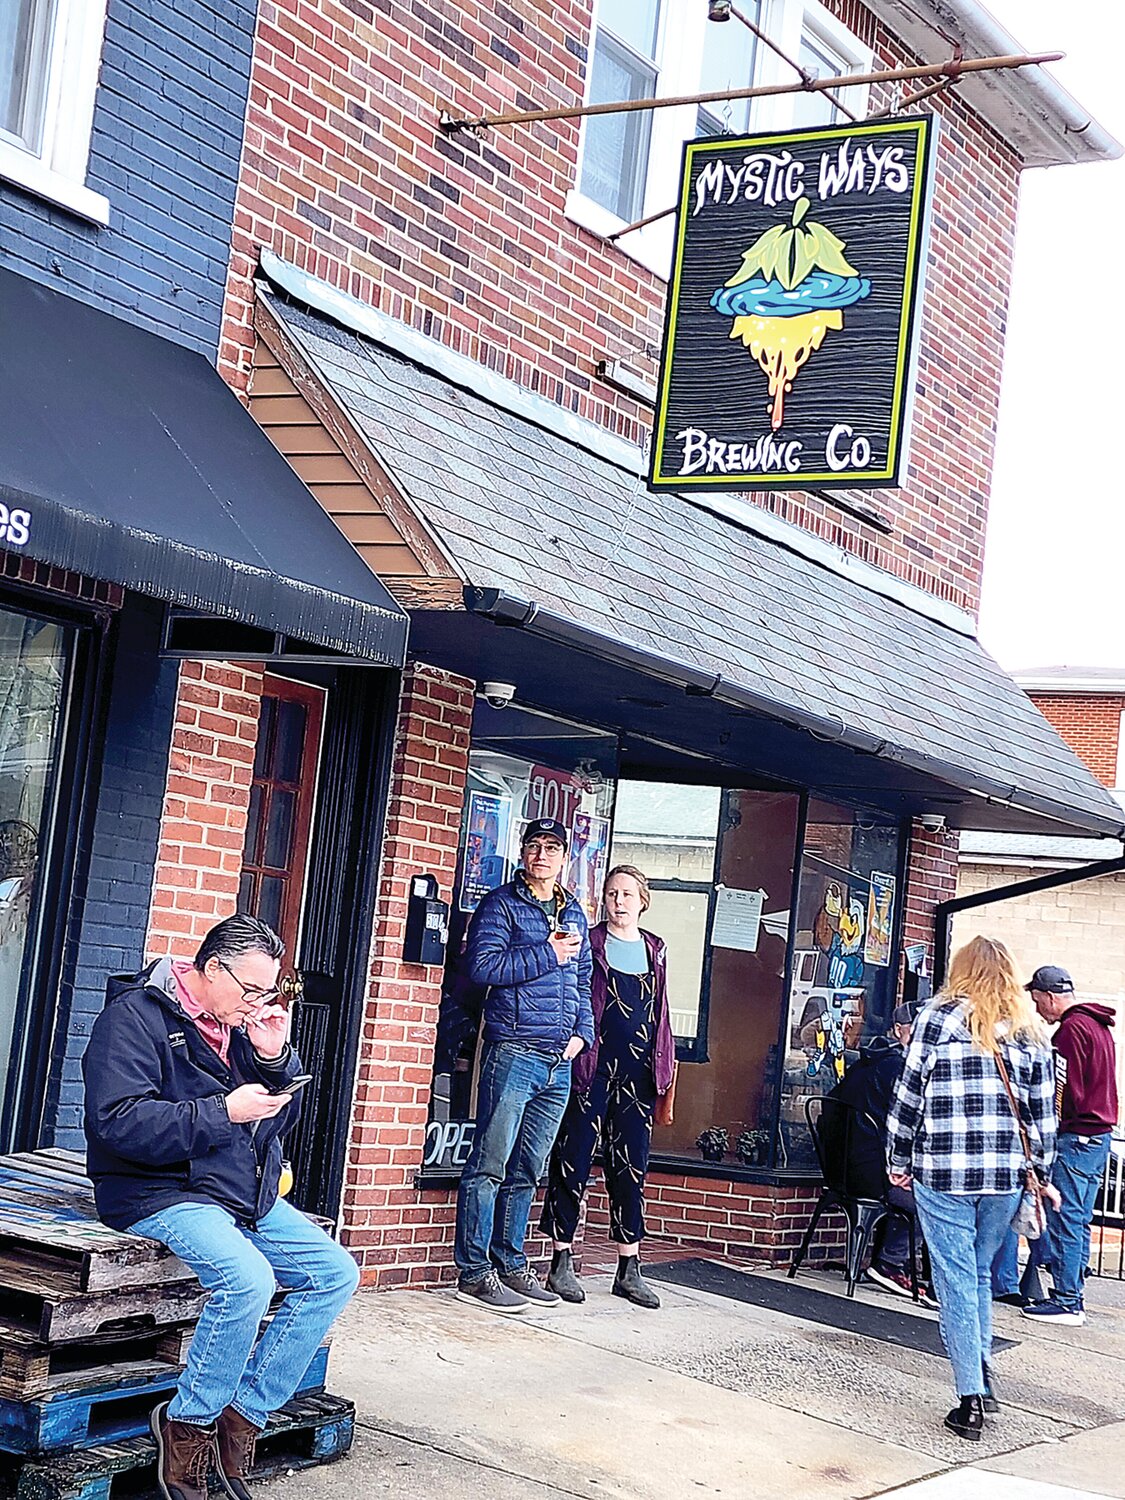 Folks gather outside Mystic Ways Brewing Co., one of the Perkasie Ale Trail stops.